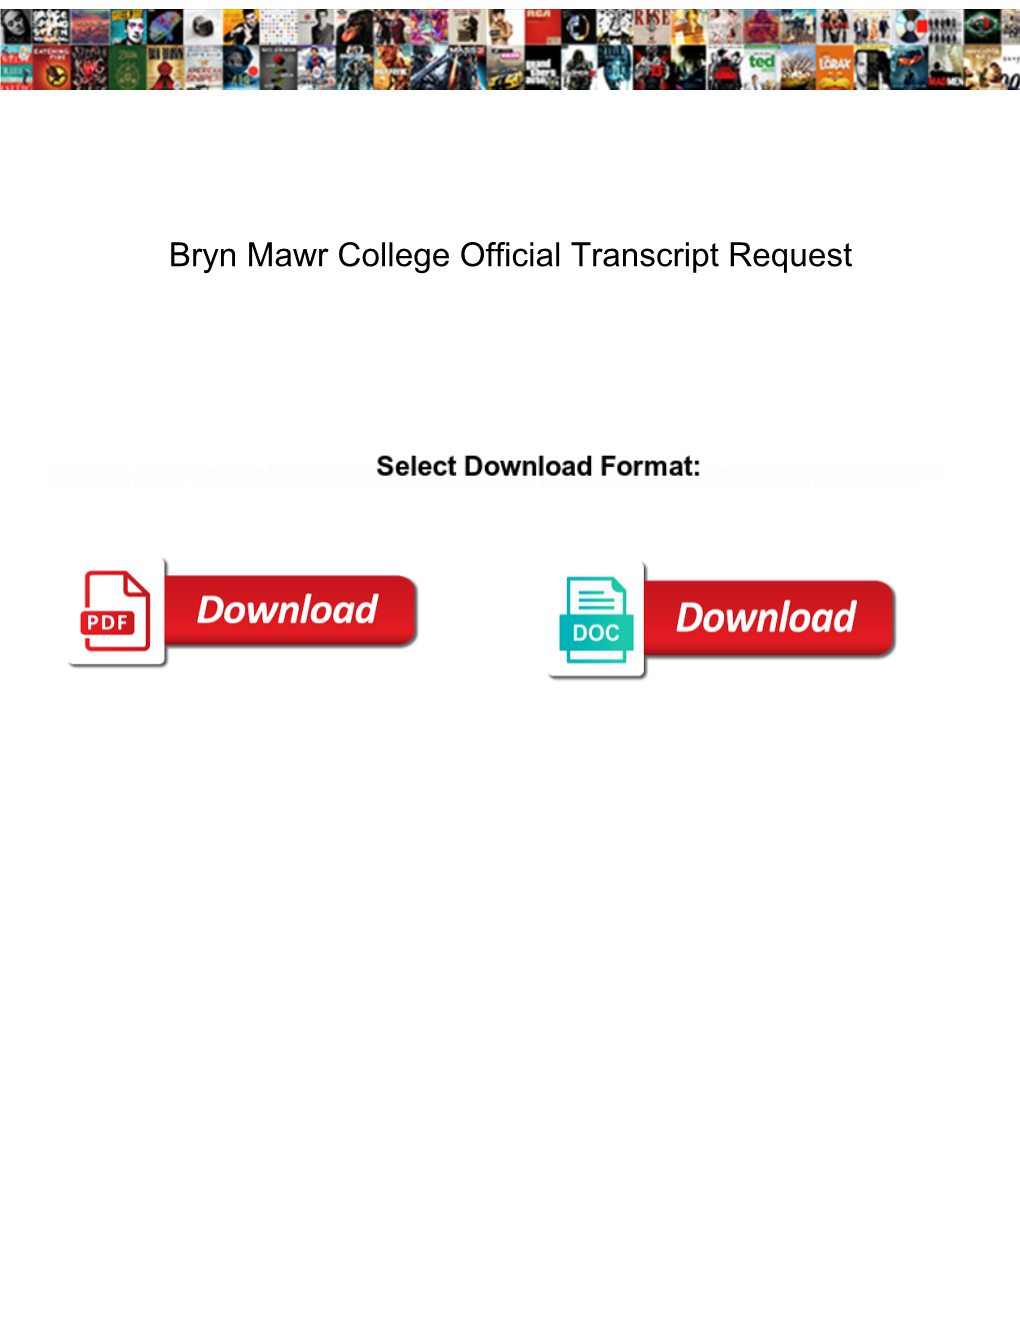 Bryn Mawr College Official Transcript Request